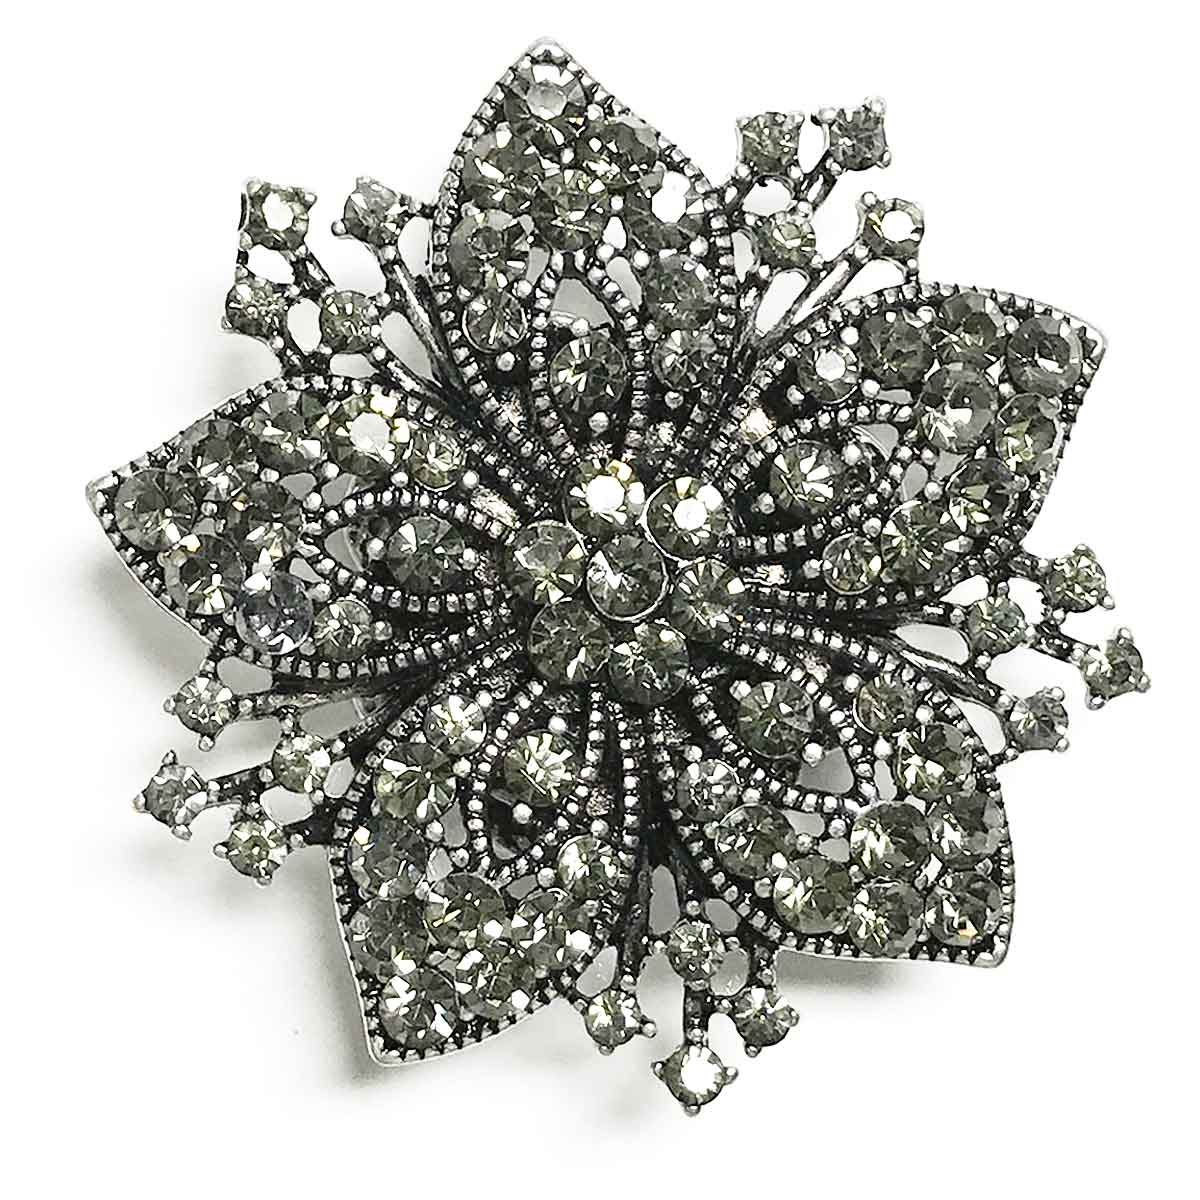 2997 - Artful Design Magnetic Brooches